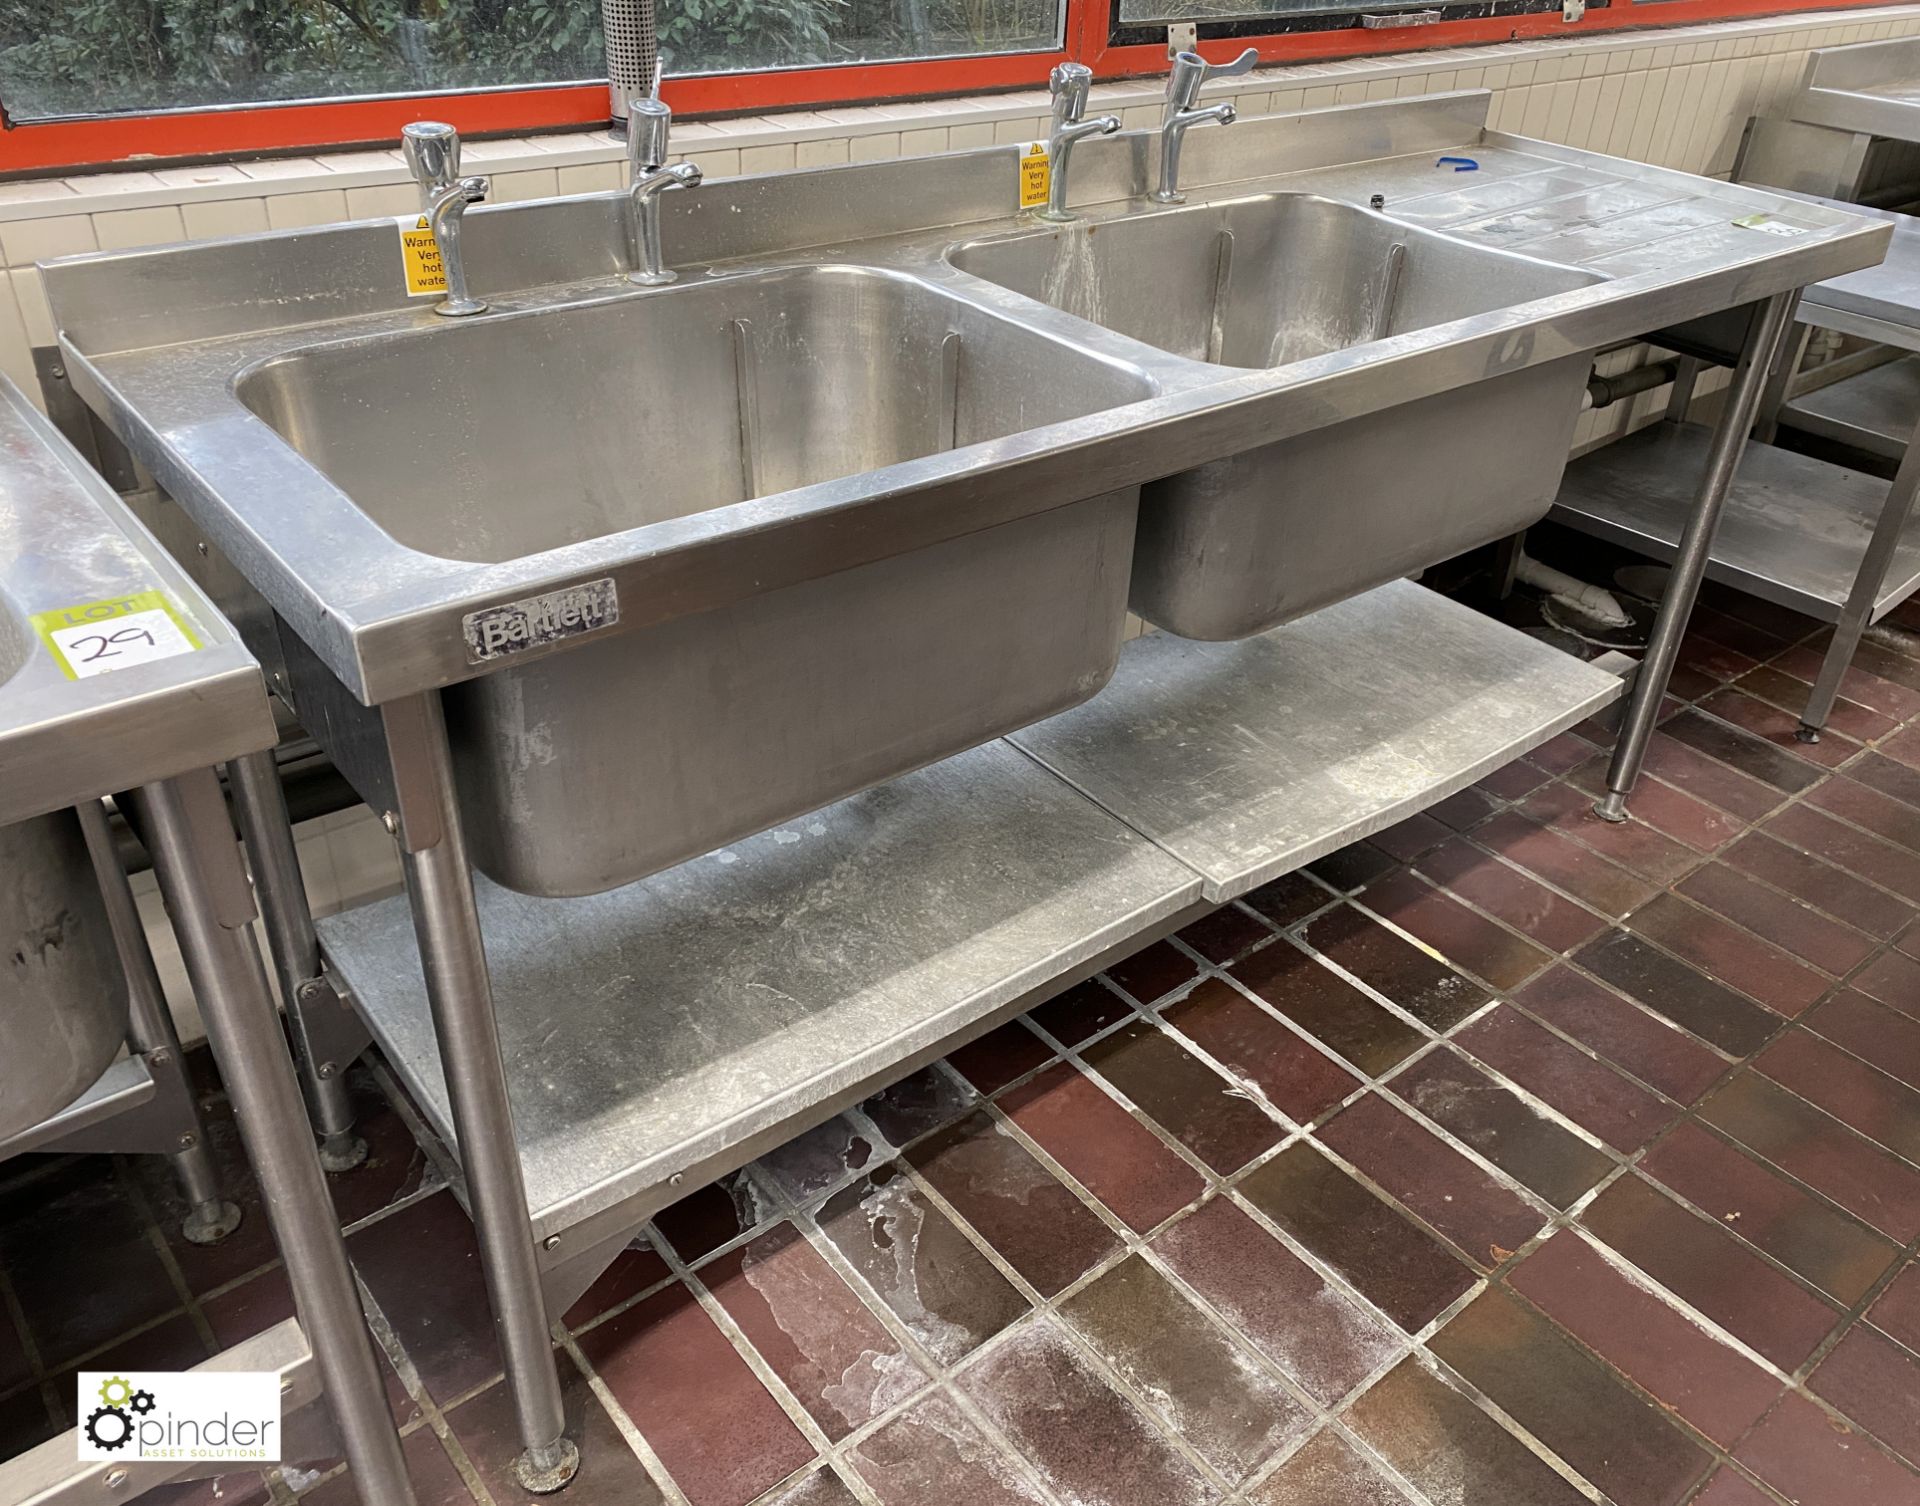 Stainless steel double bowl Sink, 1800mm x 600mm x 860mm, with right hand drainer